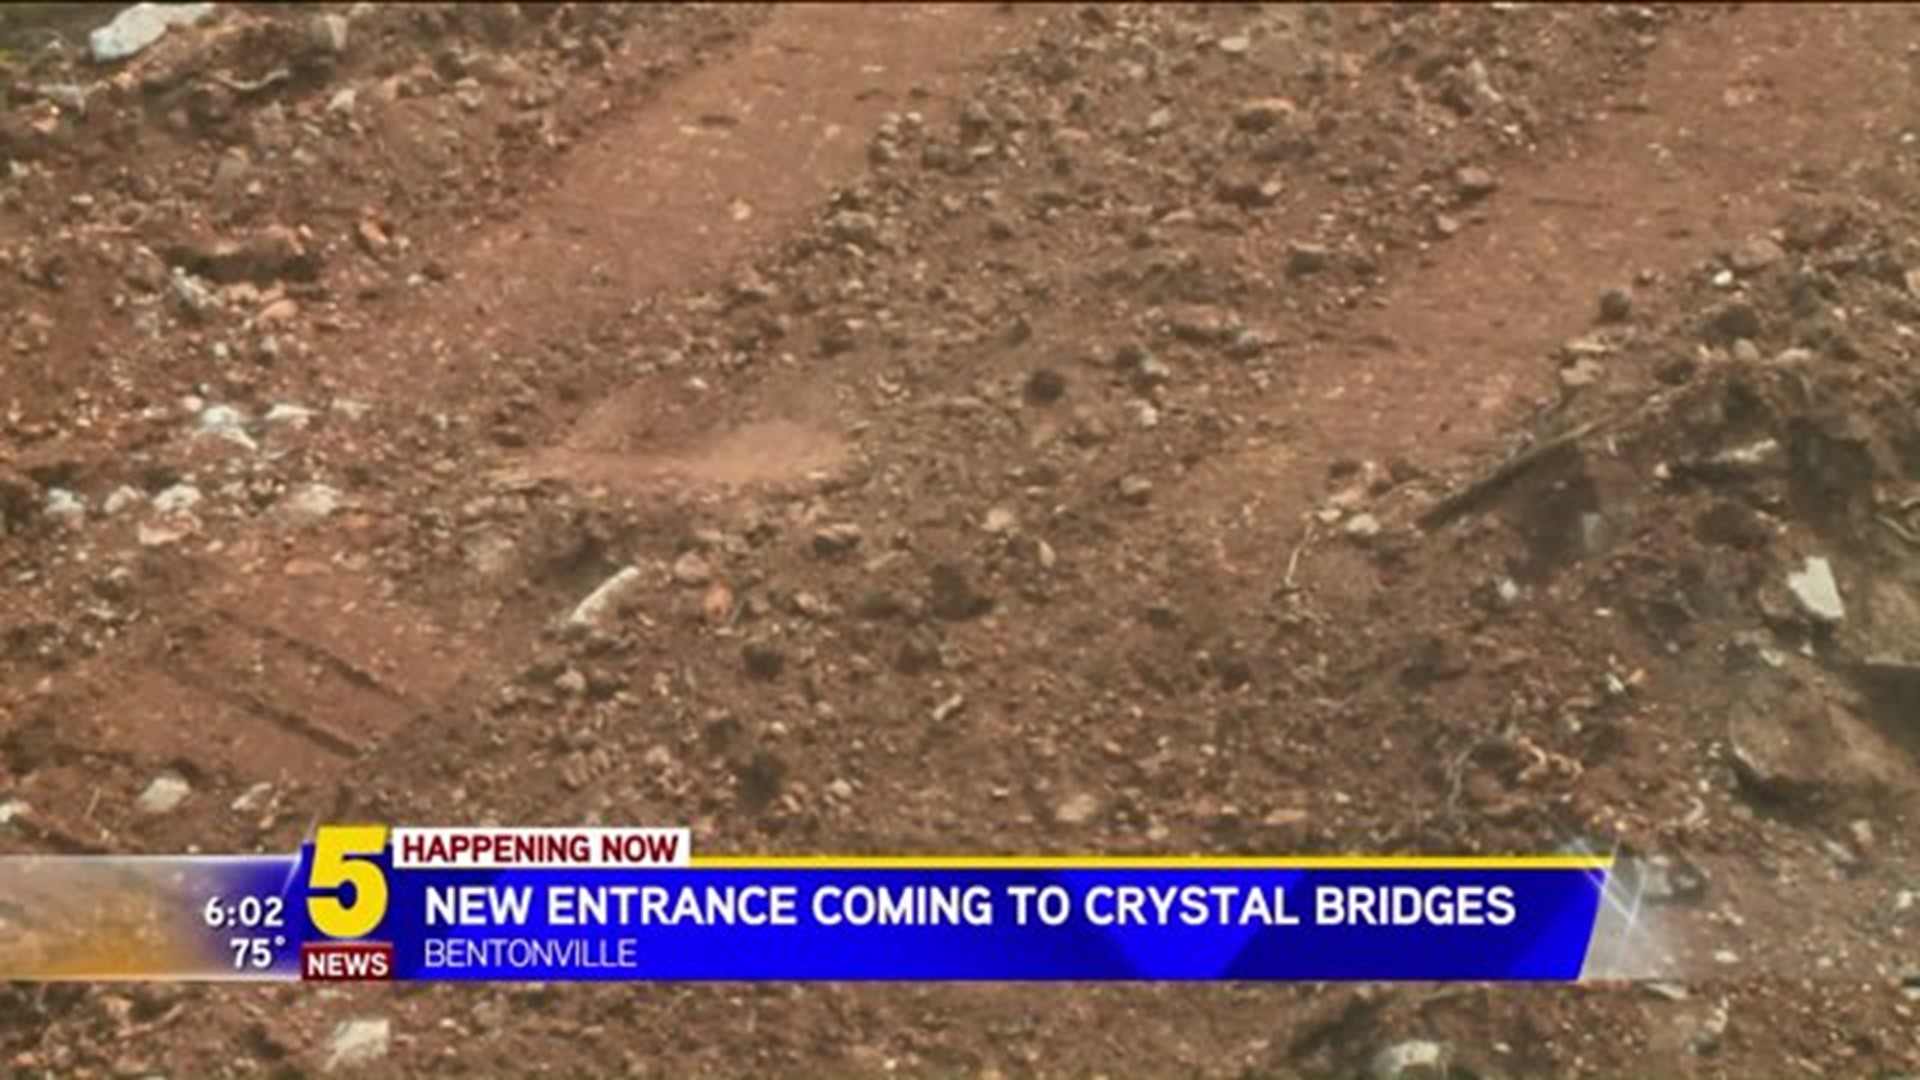 NEW ENTRANCE COMING TO CRYSTAL BRIDGES